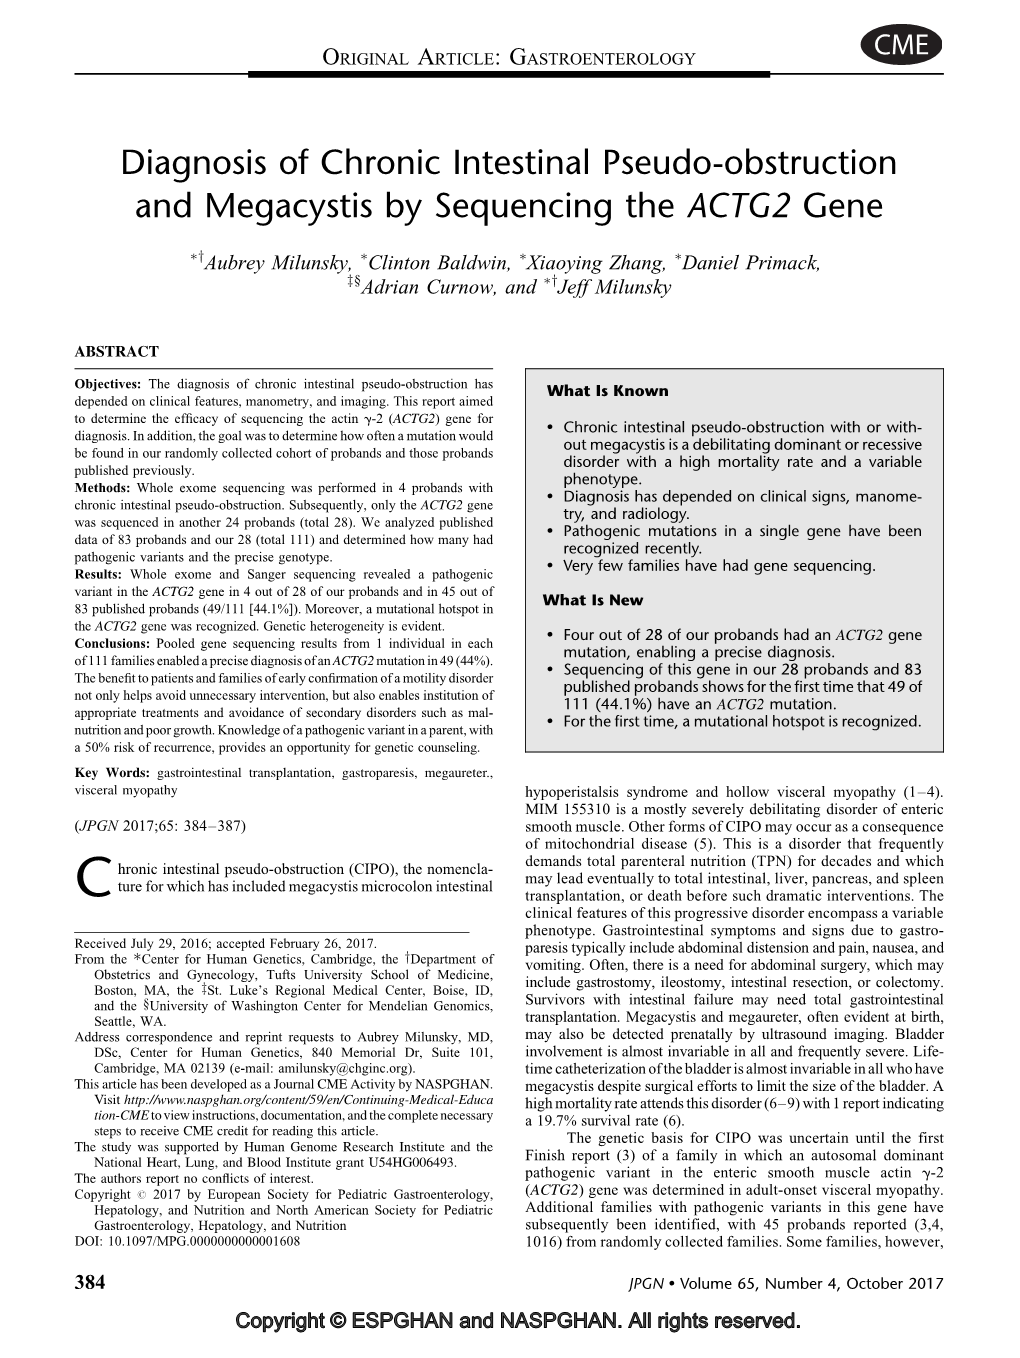 Diagnosis of Chronic Intestinal Pseudo-Obstruction and Megacystis by Sequencing the ACTG2 Gene